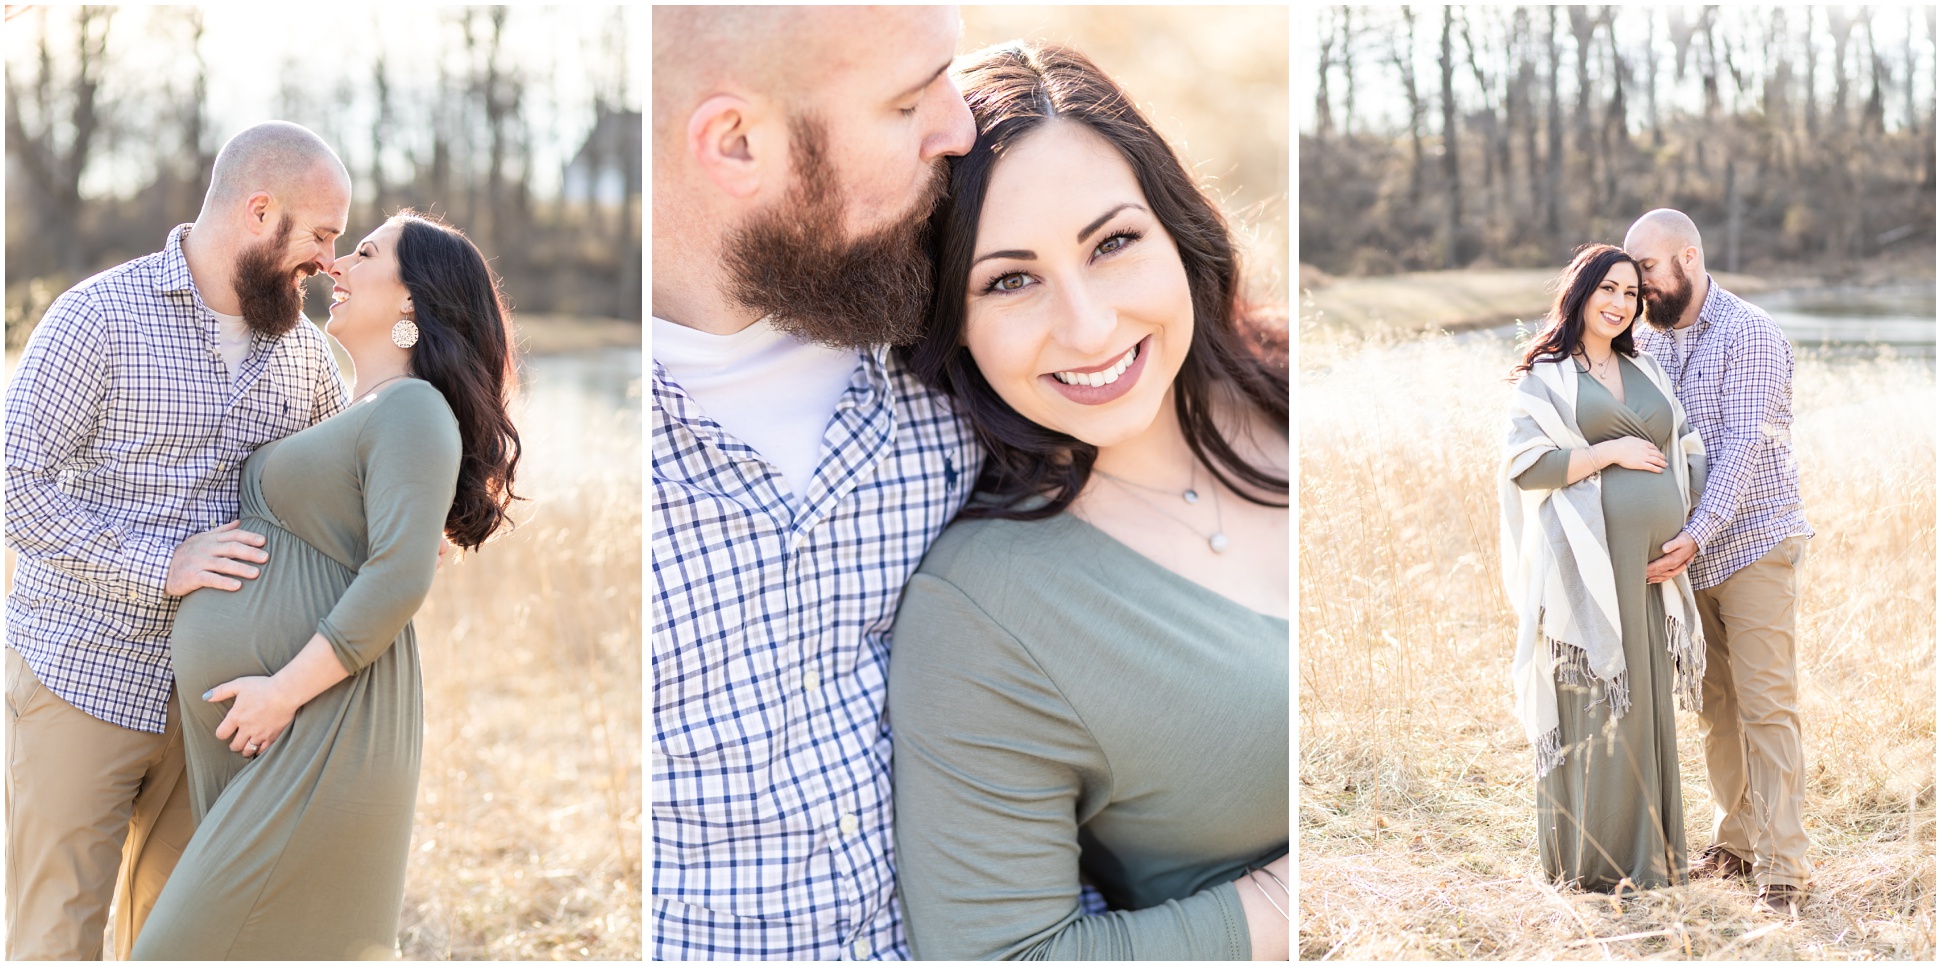 Three Images from Maternity Session in Harford County, MD in a Wheat Field